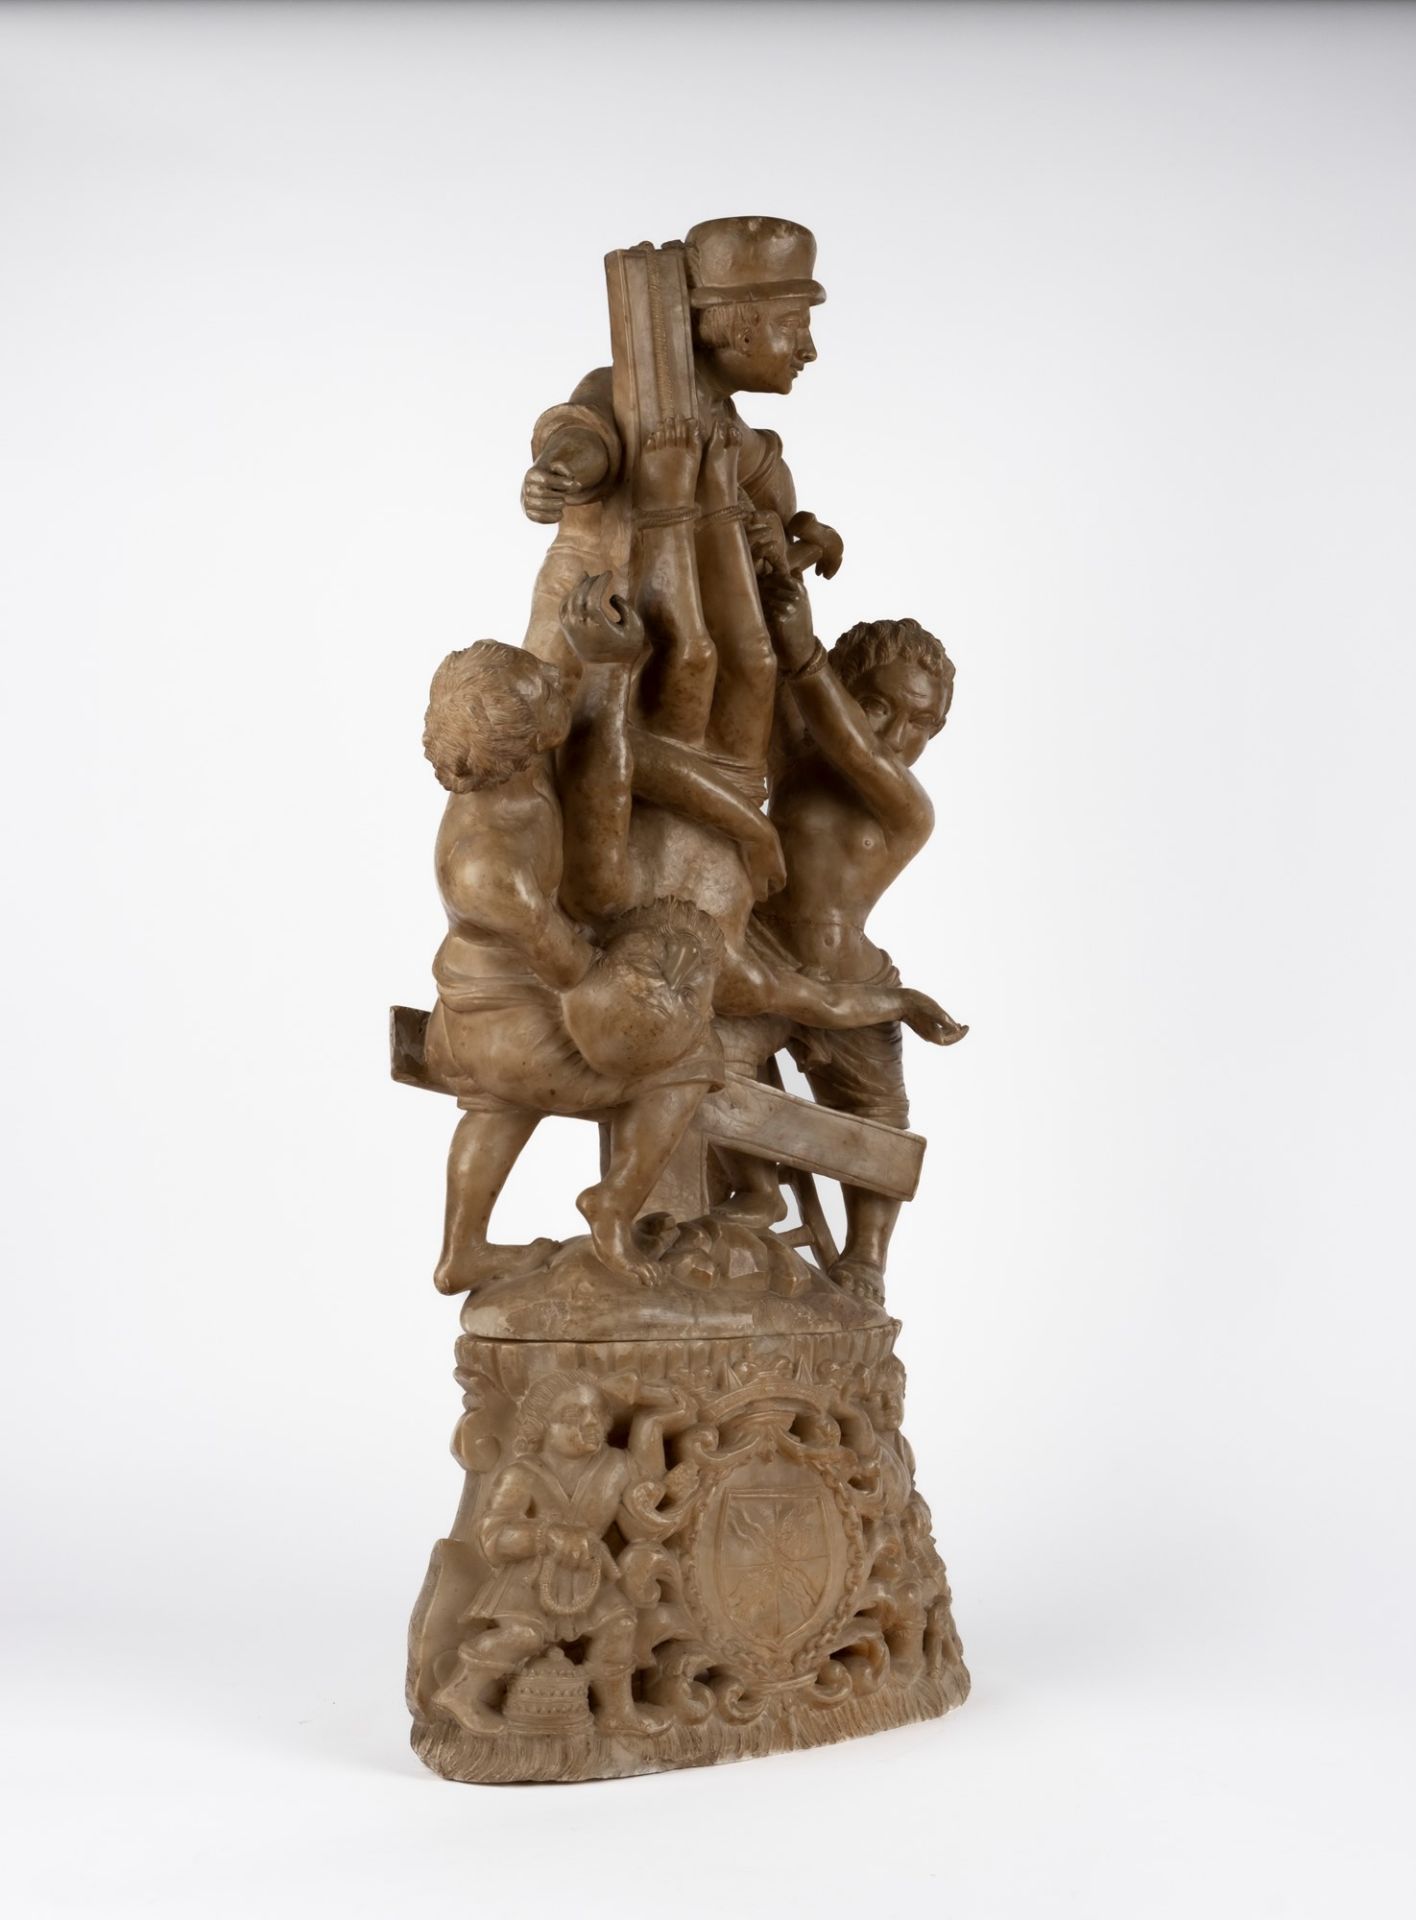 Alabaster sculpture depicting the Deposition, Sicily, 17th century - Image 3 of 4